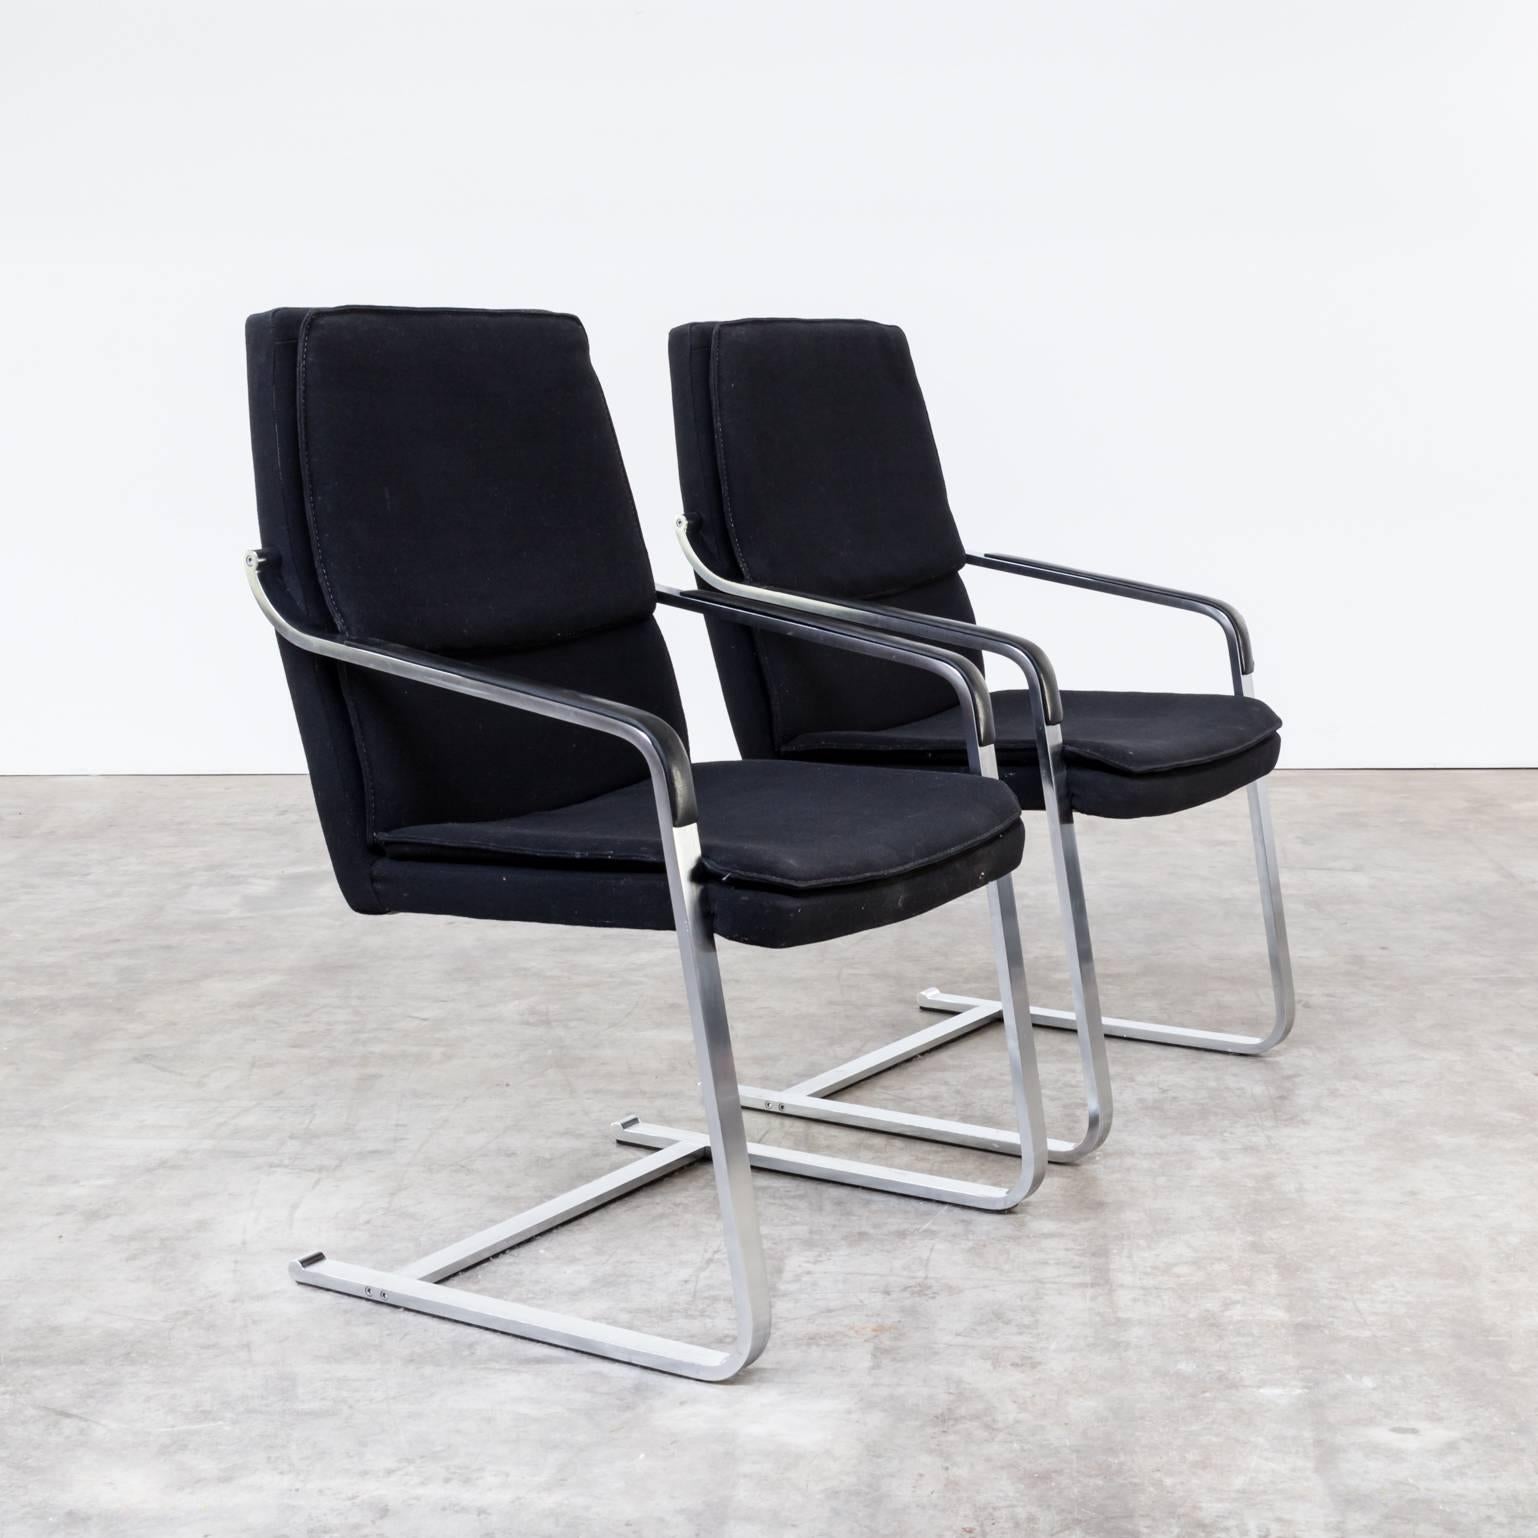 Mid-Century Modern Walter Knoll Chrome Framed Chairs, Set of Two For Sale